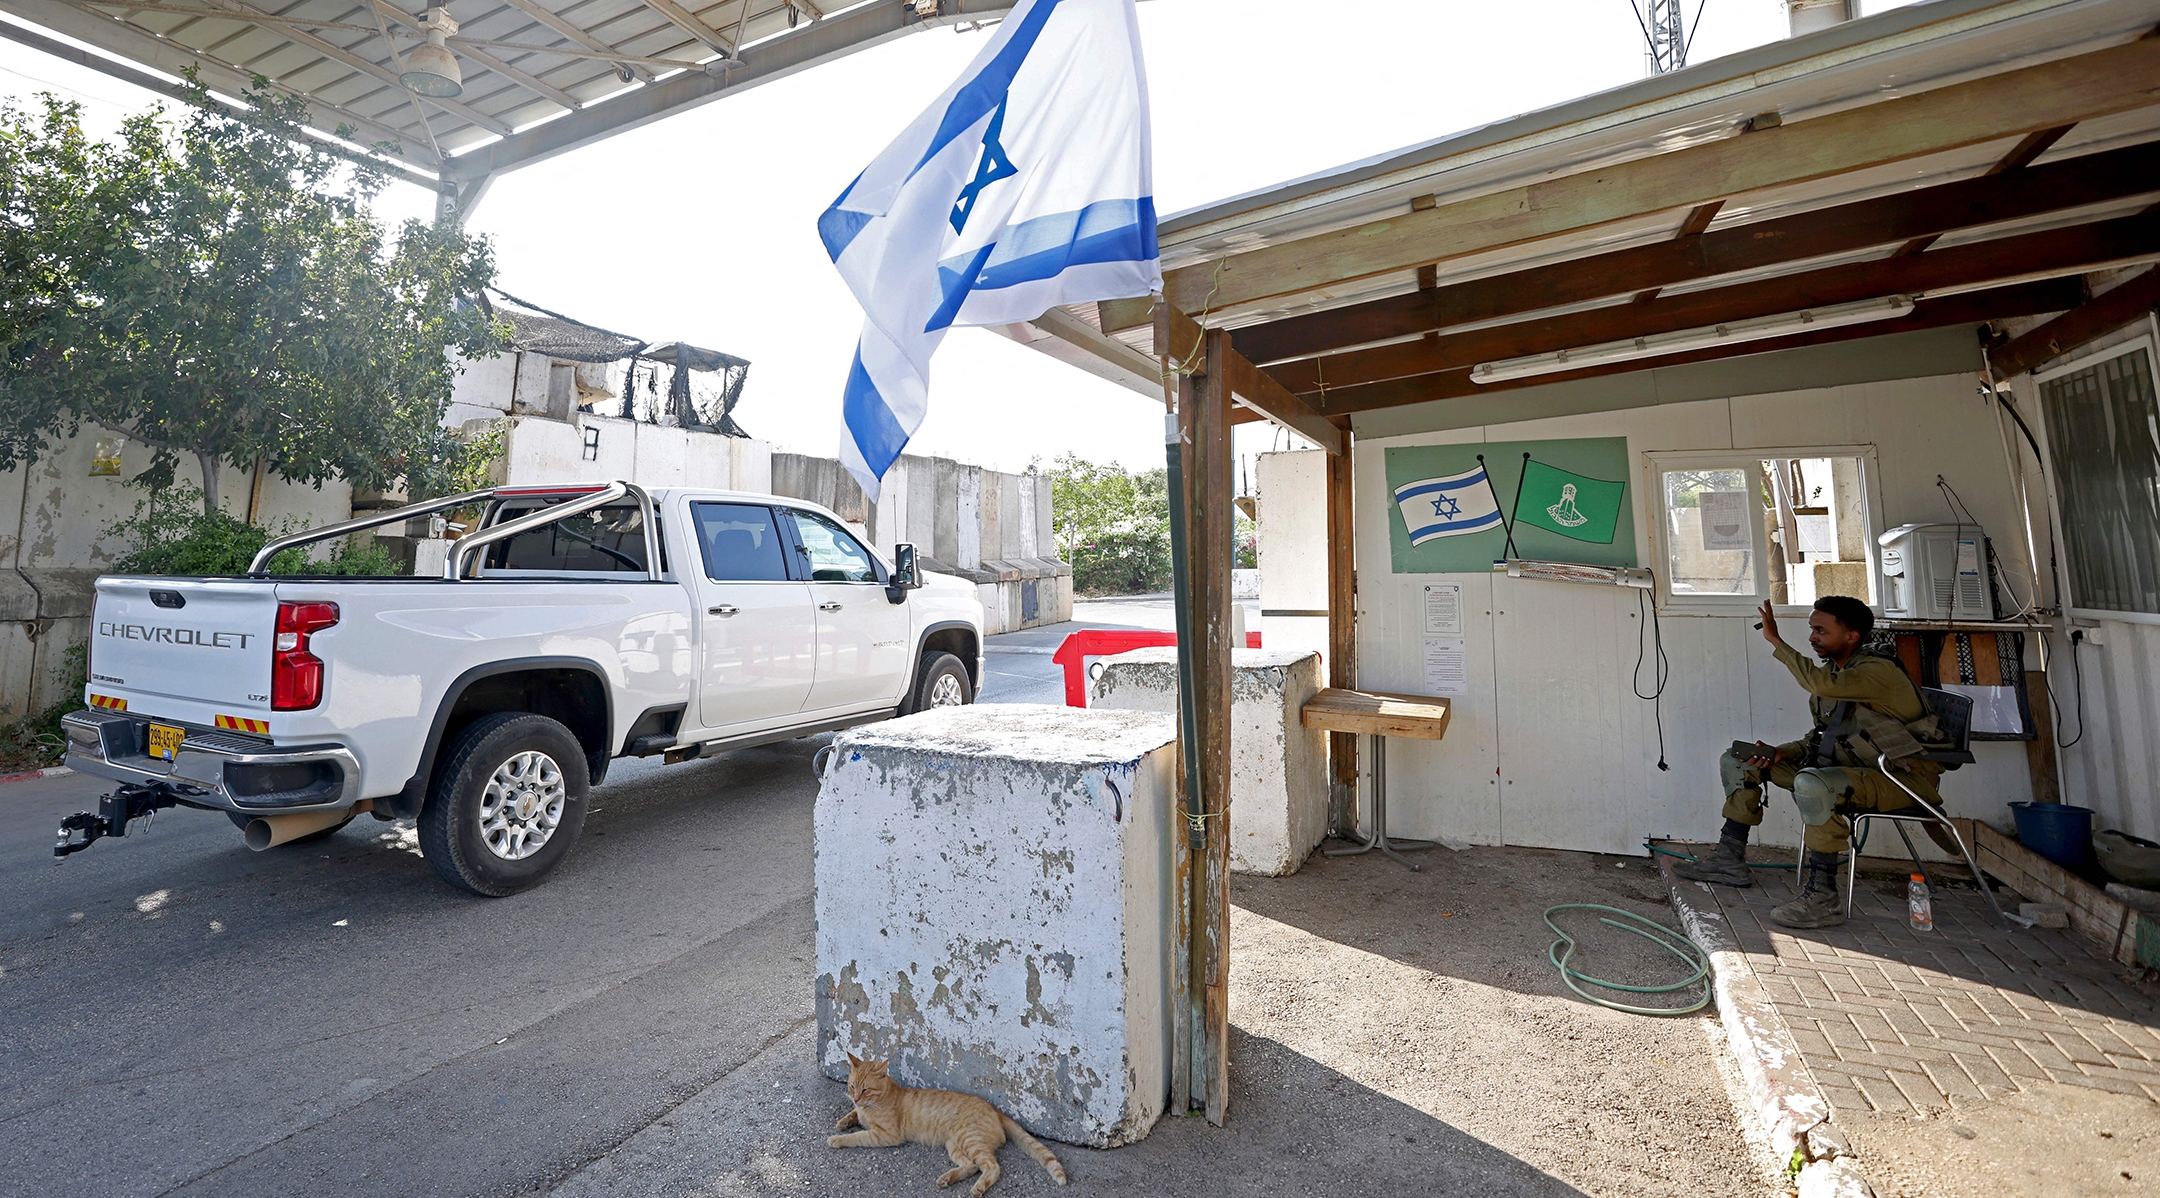 An Israeli soldier secures a checkpoint at the entrance of Ghajar, Sept. 7, 2022. (Jalaa Marey/AFP via Getty Images)